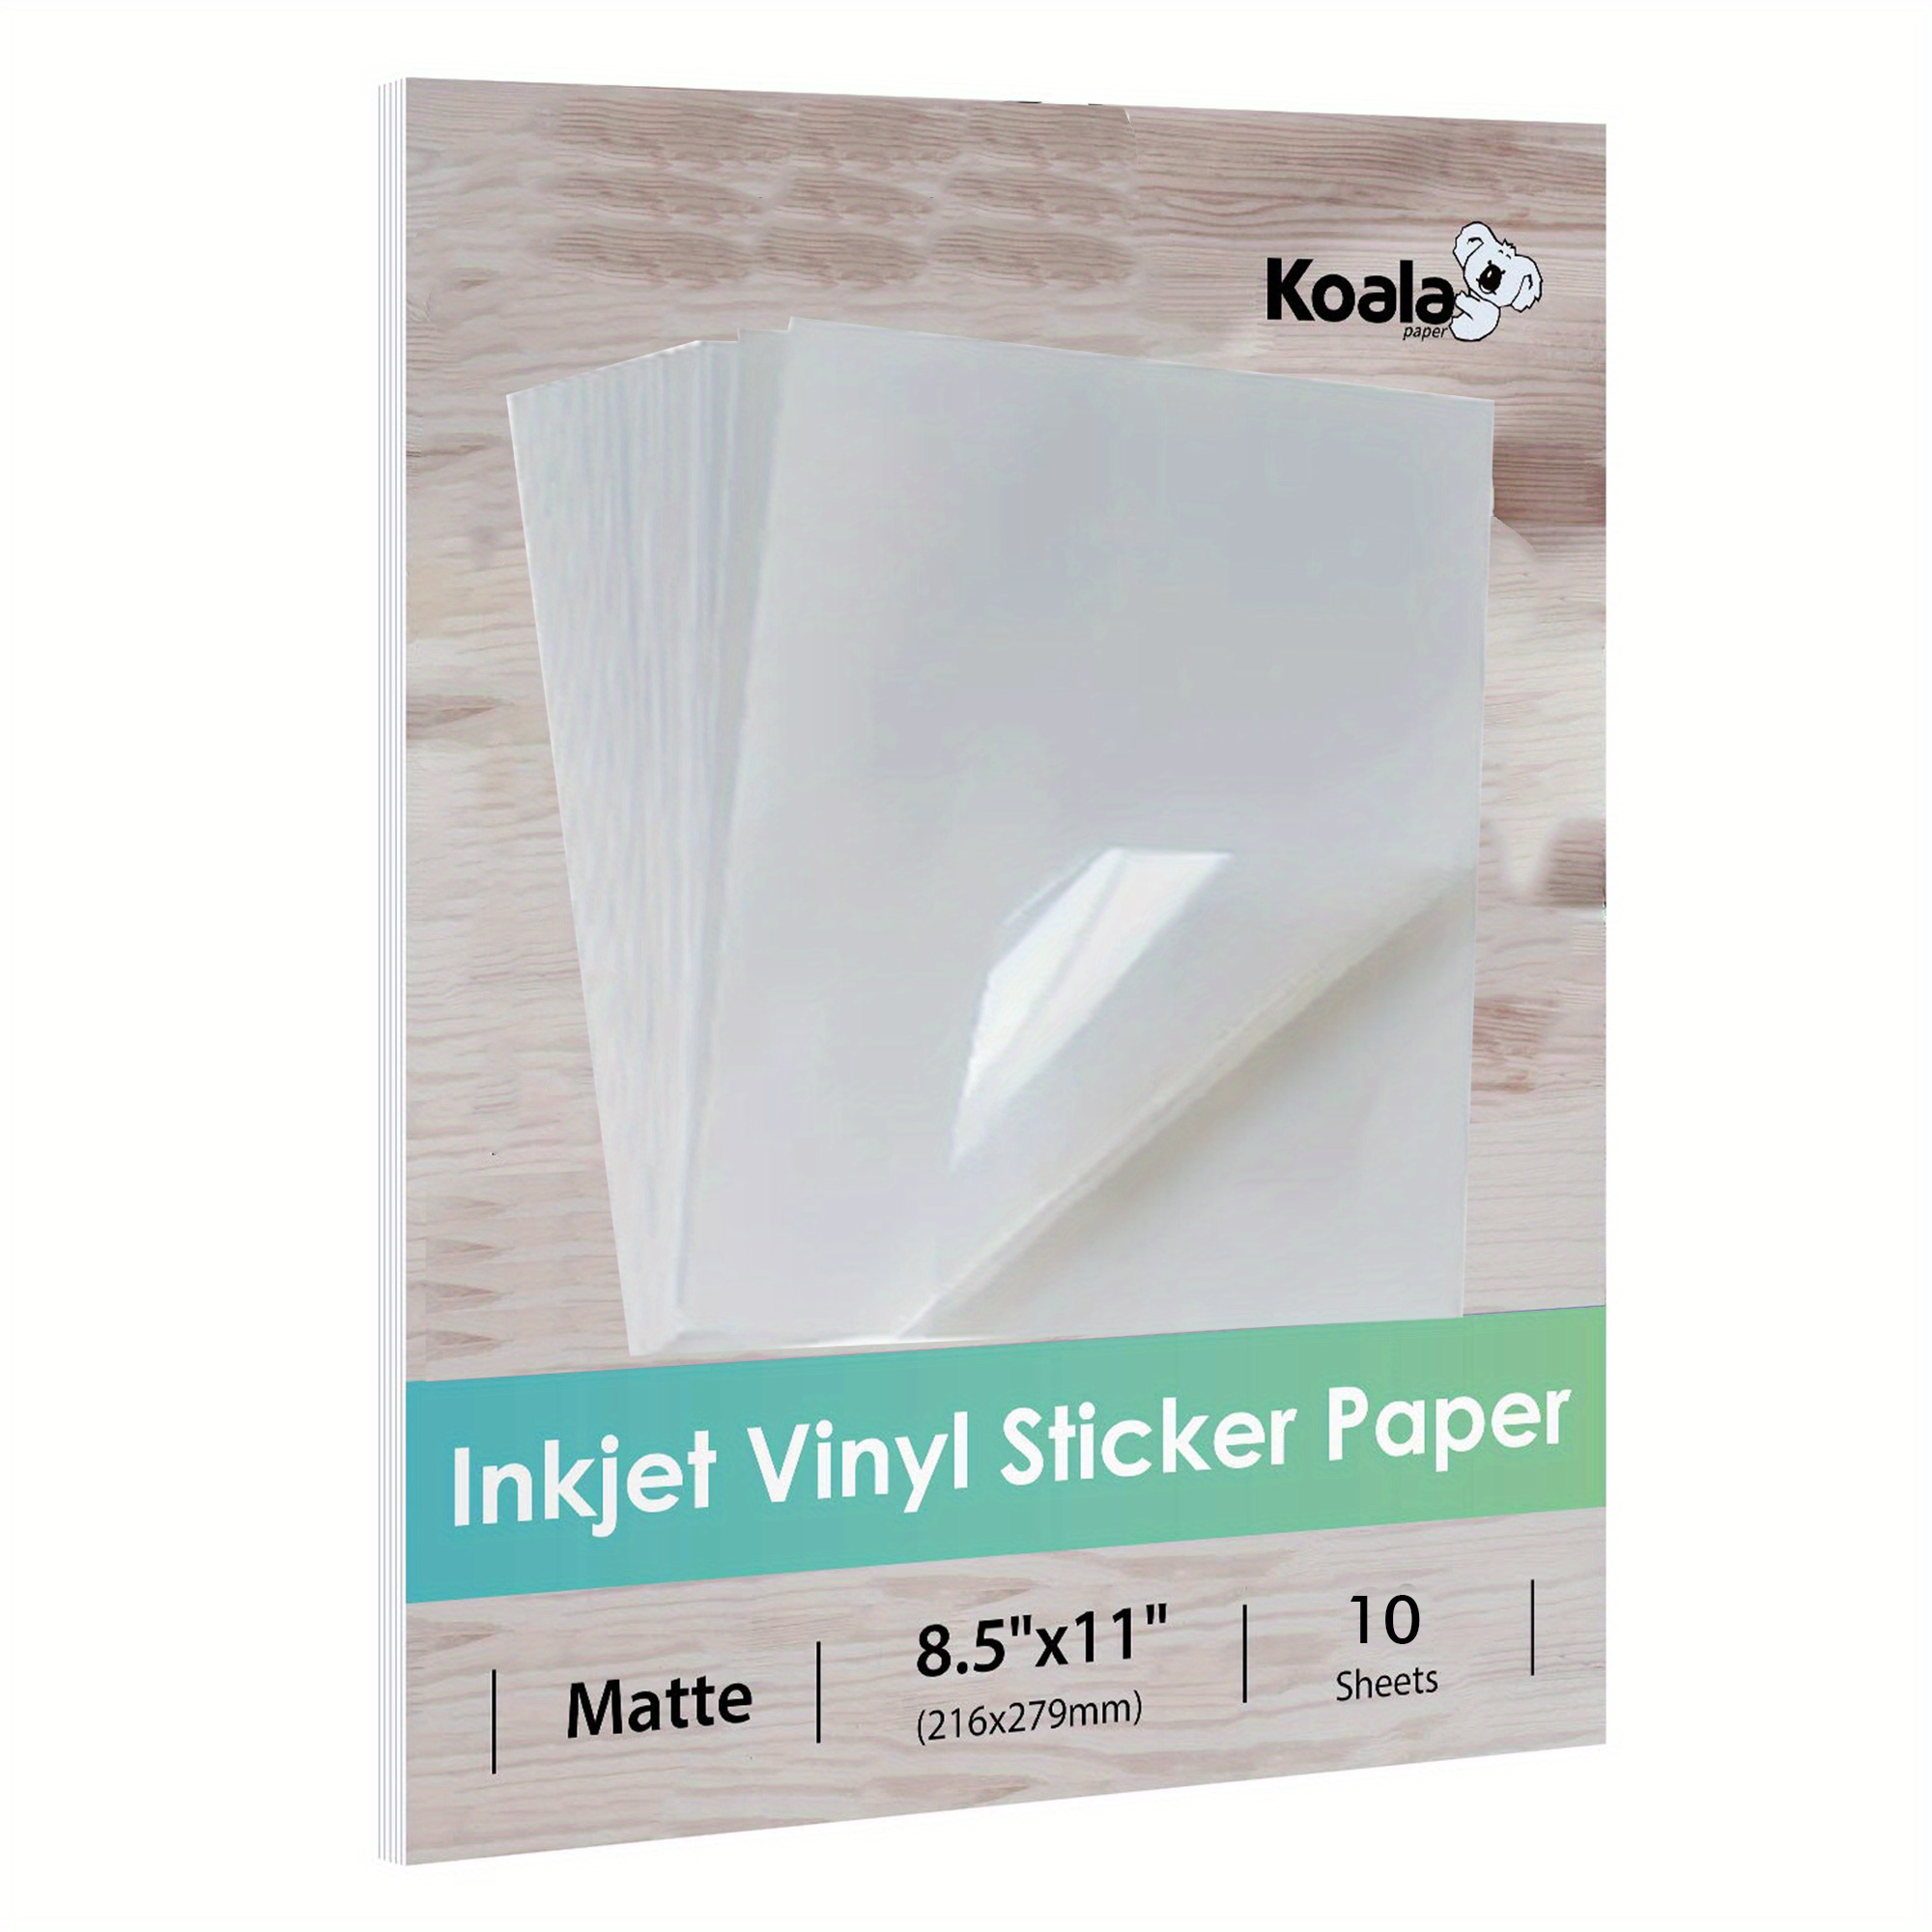 Uinkit Holographic Sticker Paper for Inkjet and Laser Printer 25sheets 8.5x11 Inches Variety Finish Printable Waterproof Vinyl Sticker ,Dries Quickly